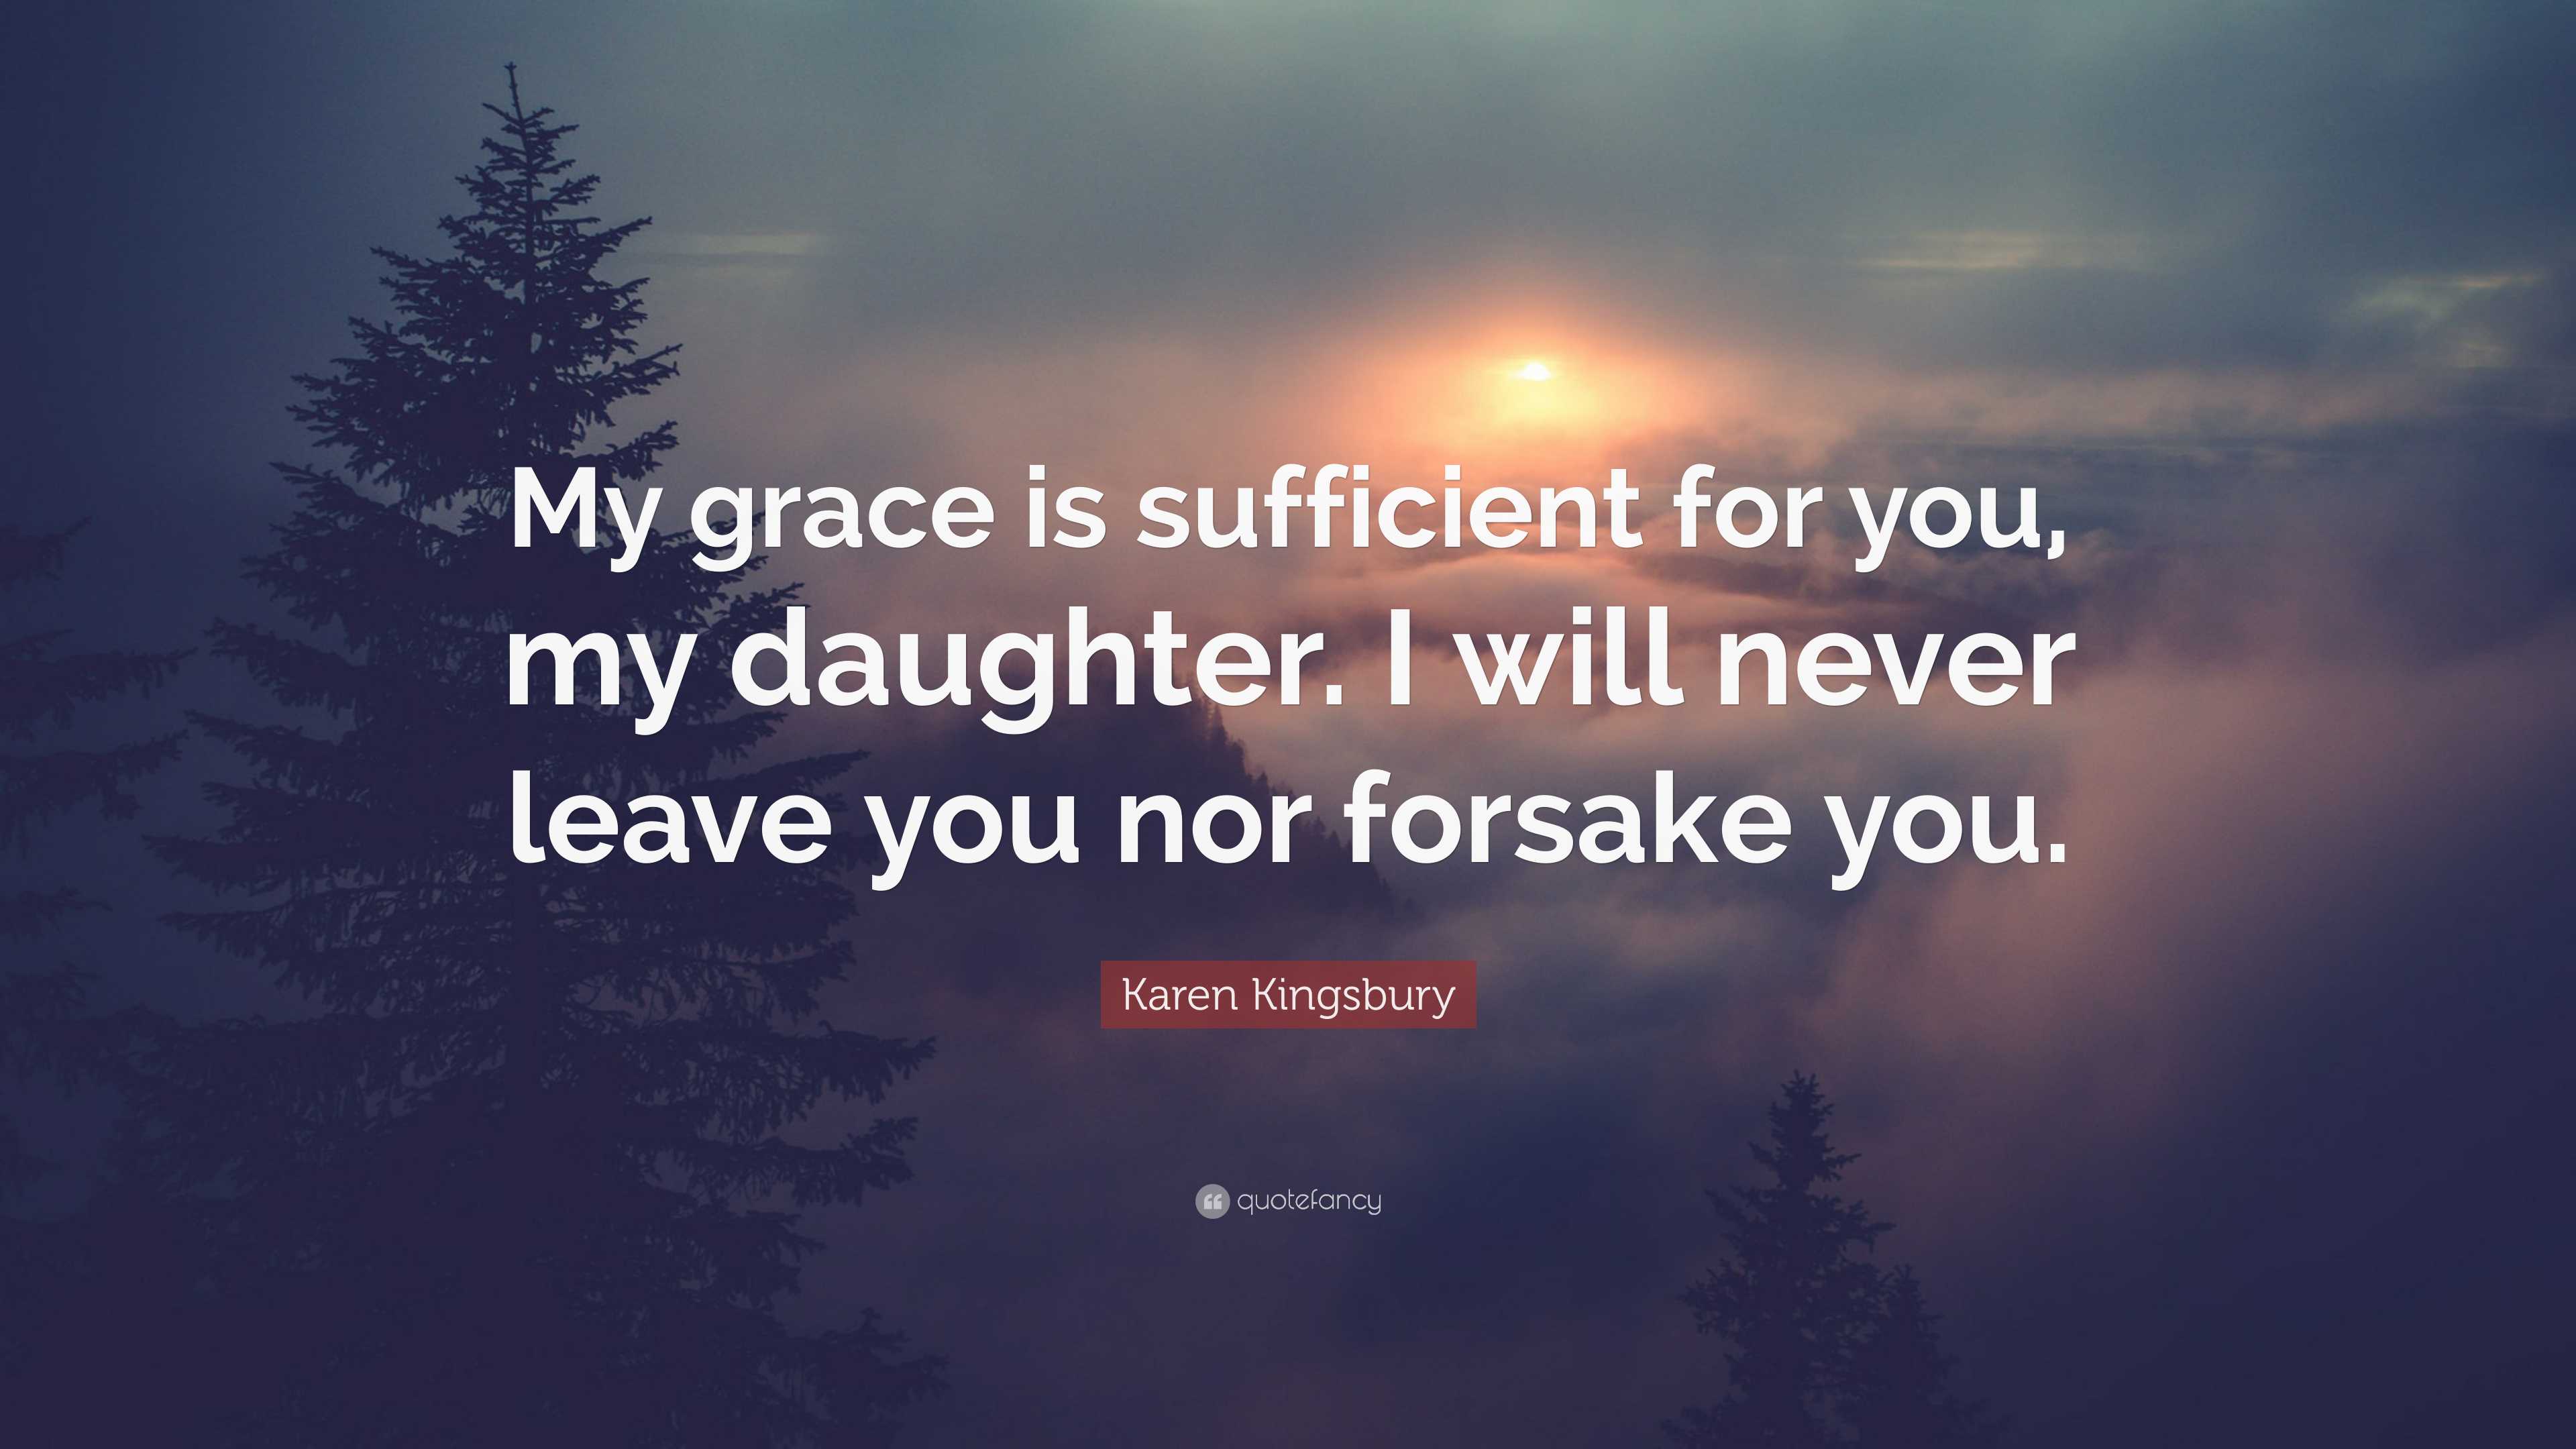 Karen Kingsbury Quote: “My grace is sufficient for you, my daughter. I ...